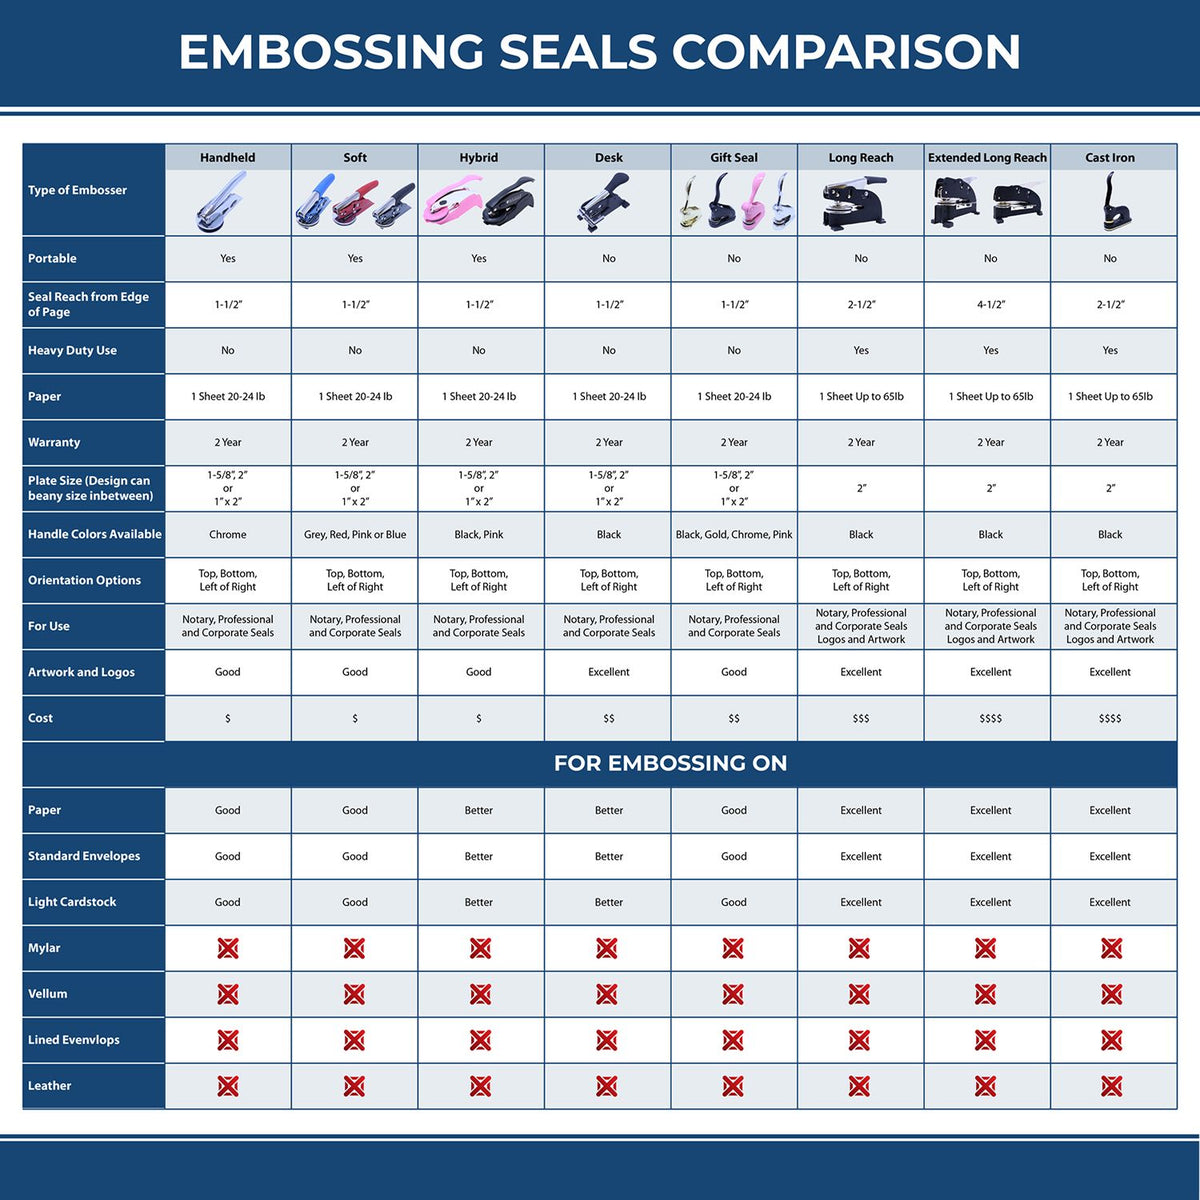 Geologist Red Soft Seal Embosser 3035GEO Embossing Seal Comparison